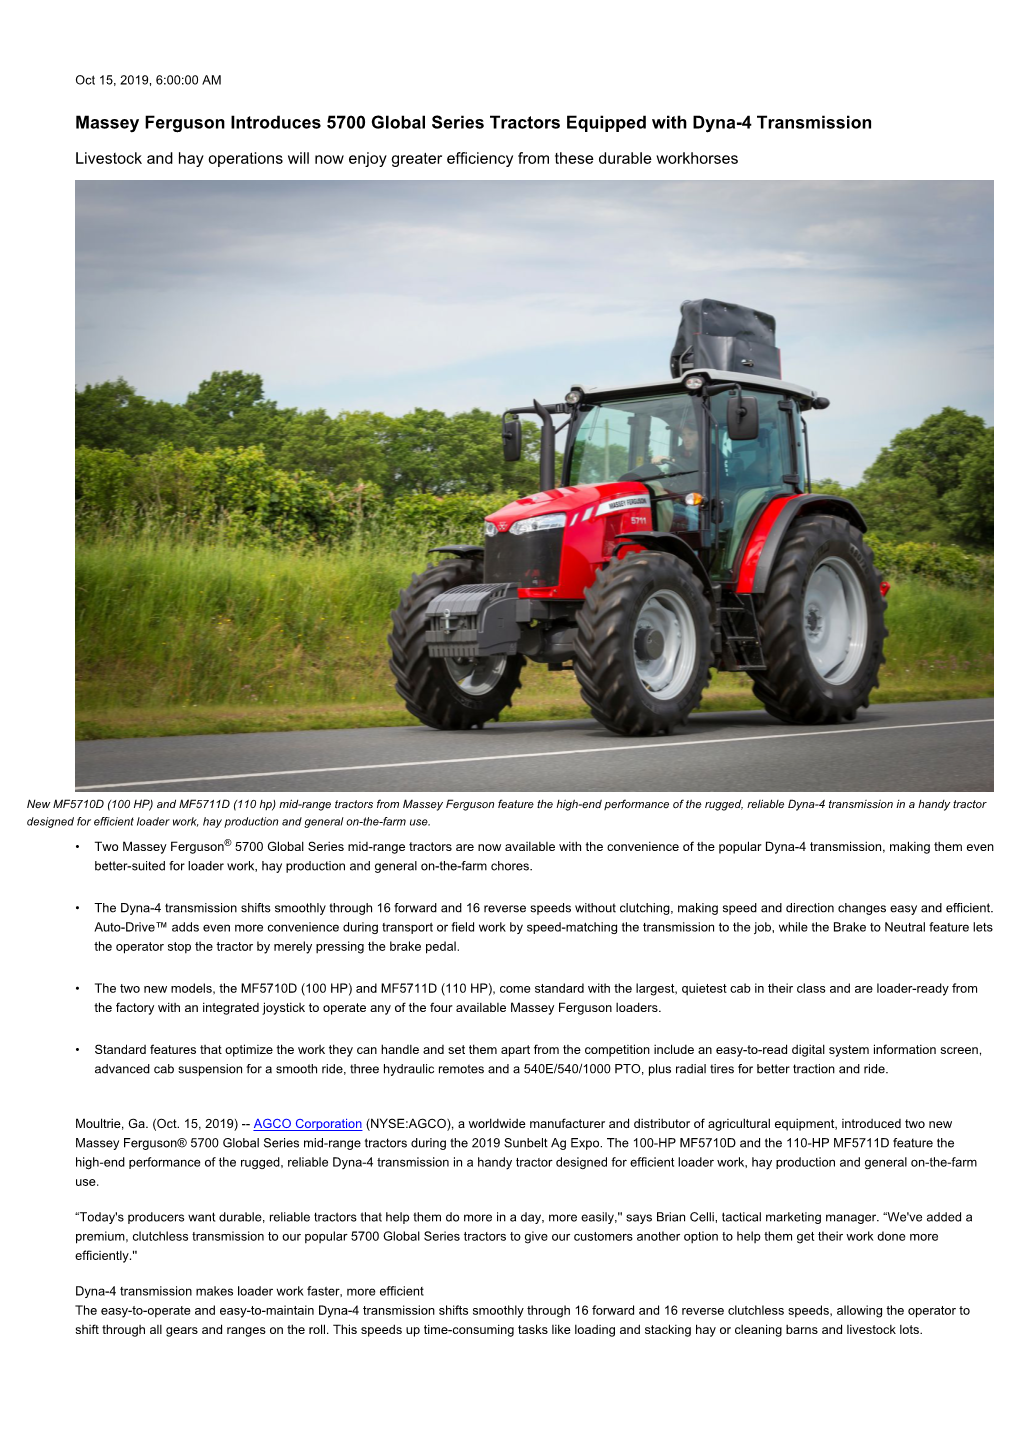 Massey Ferguson Introduces 5700 Global Series Tractors Equipped with Dyna-4 Transmission